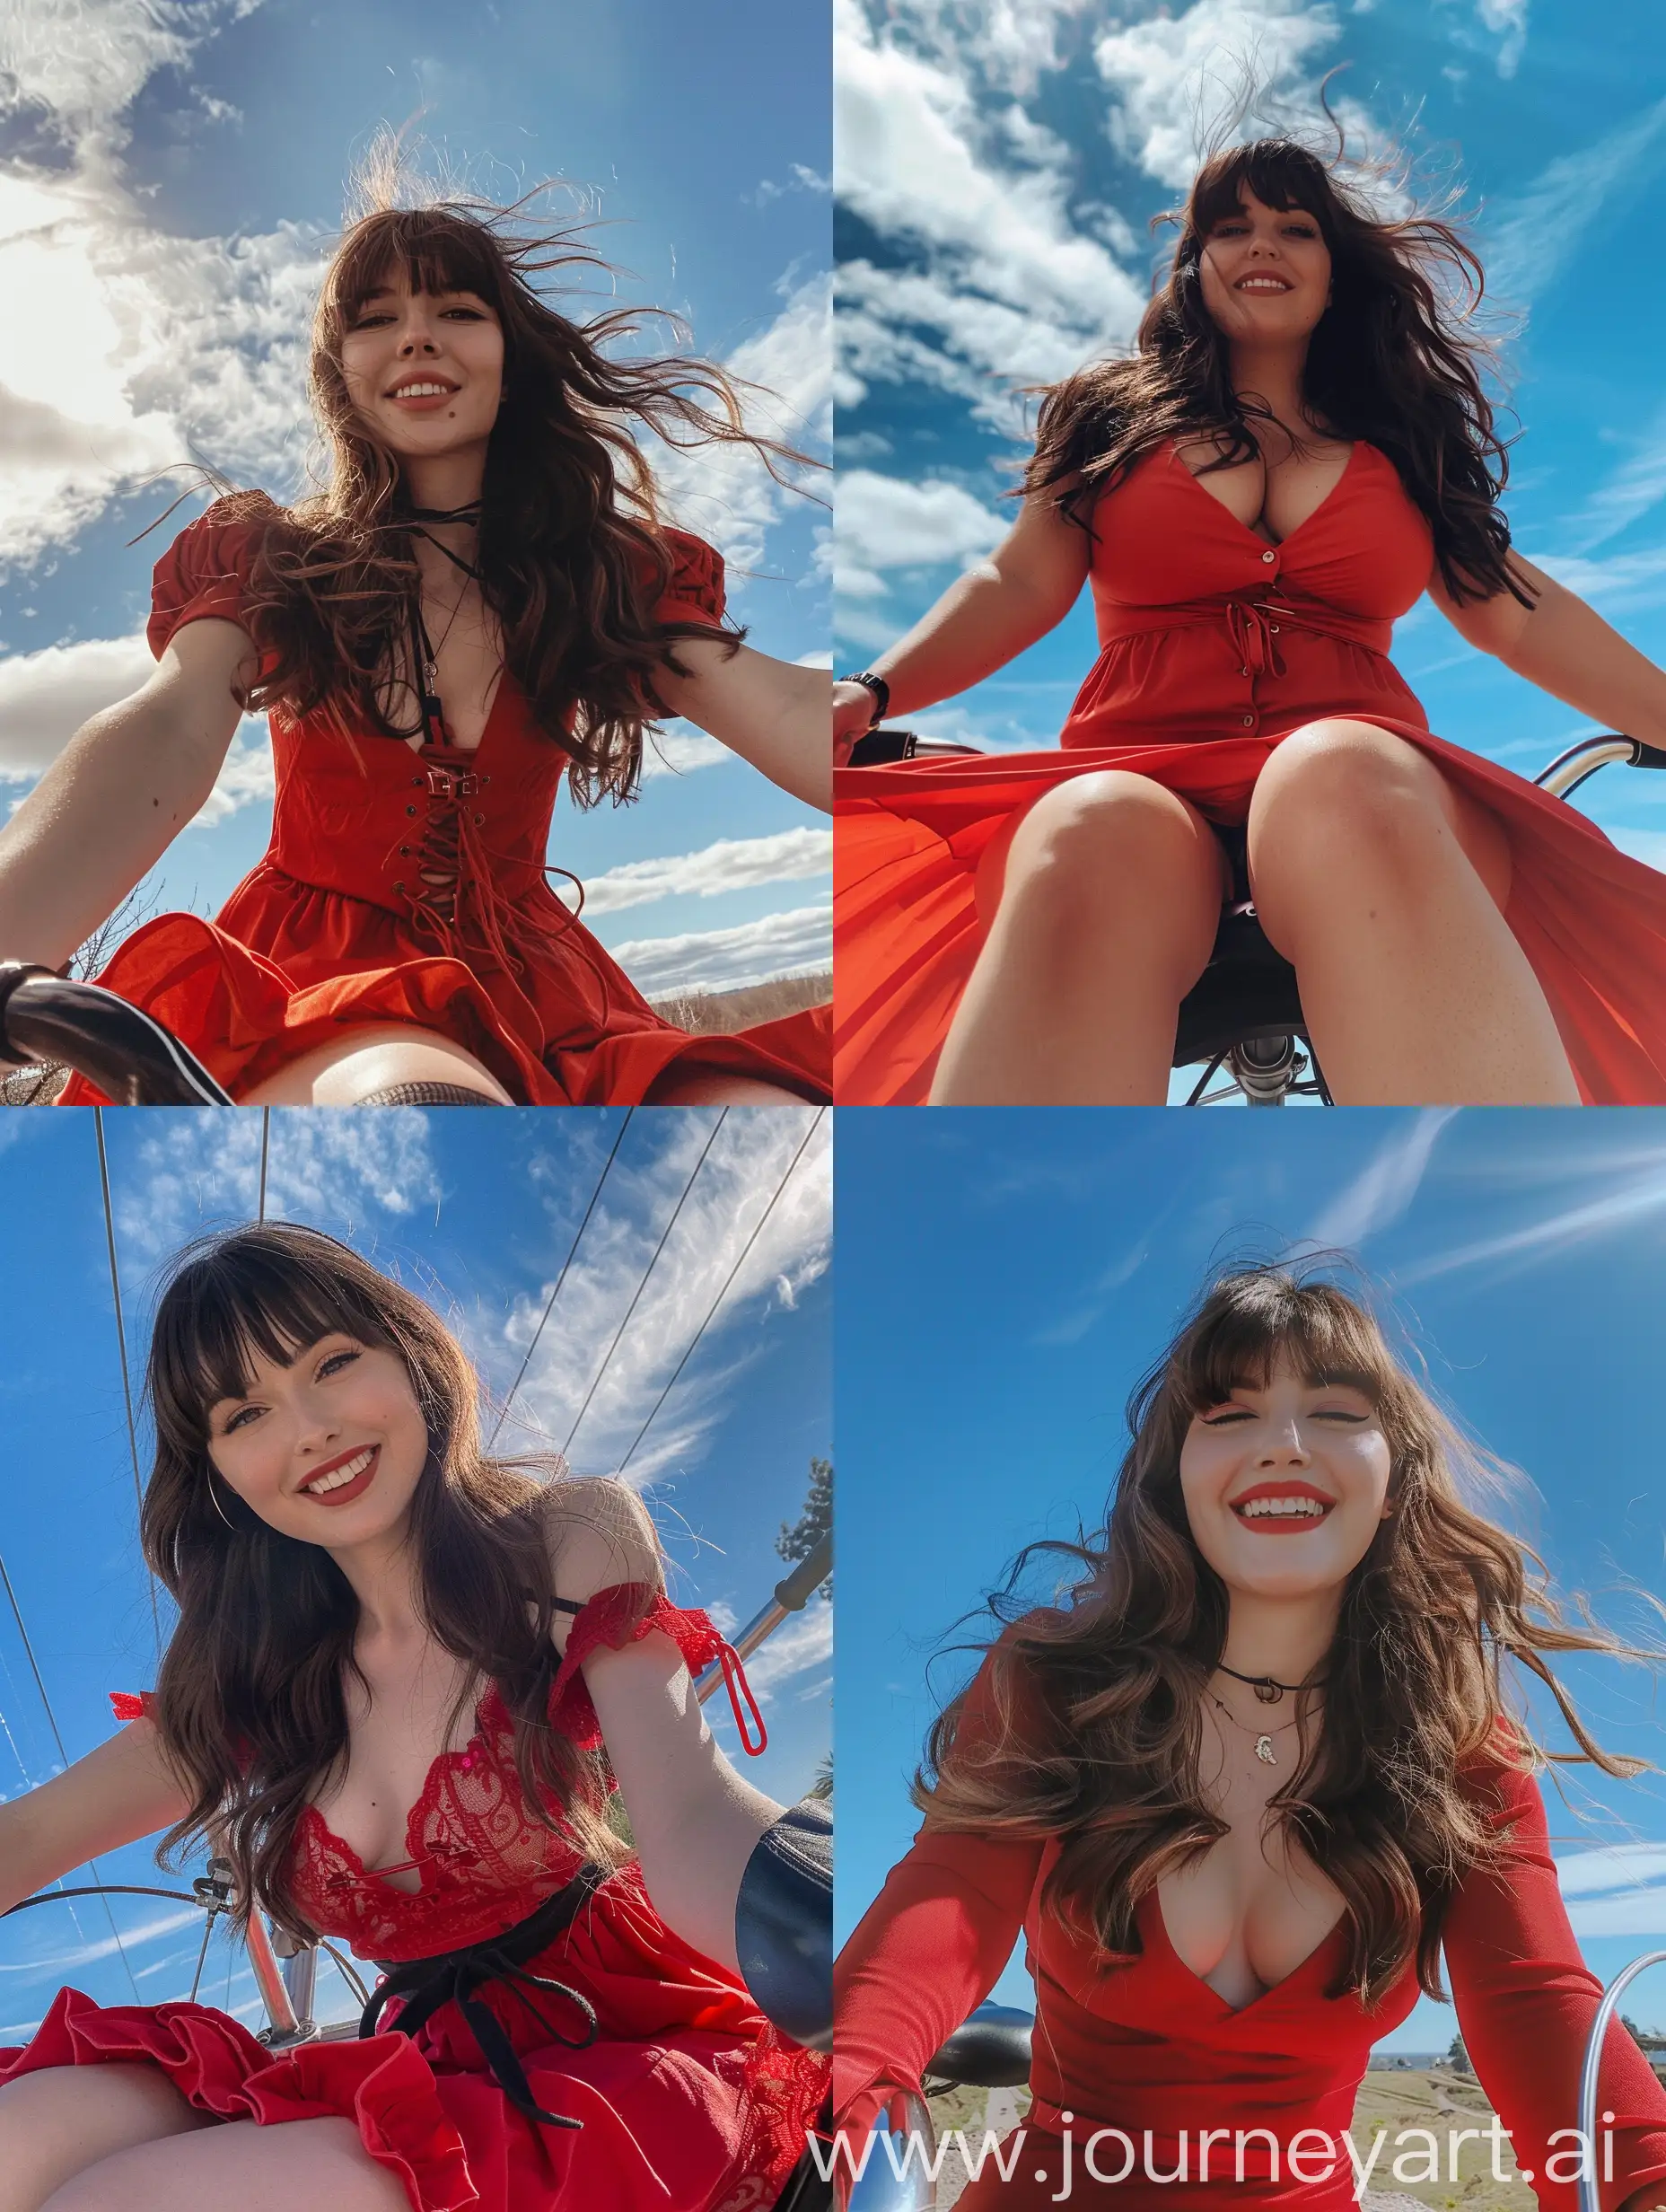 Young-Woman-in-Red-Dress-Smiling-on-Bicycle-Selfie